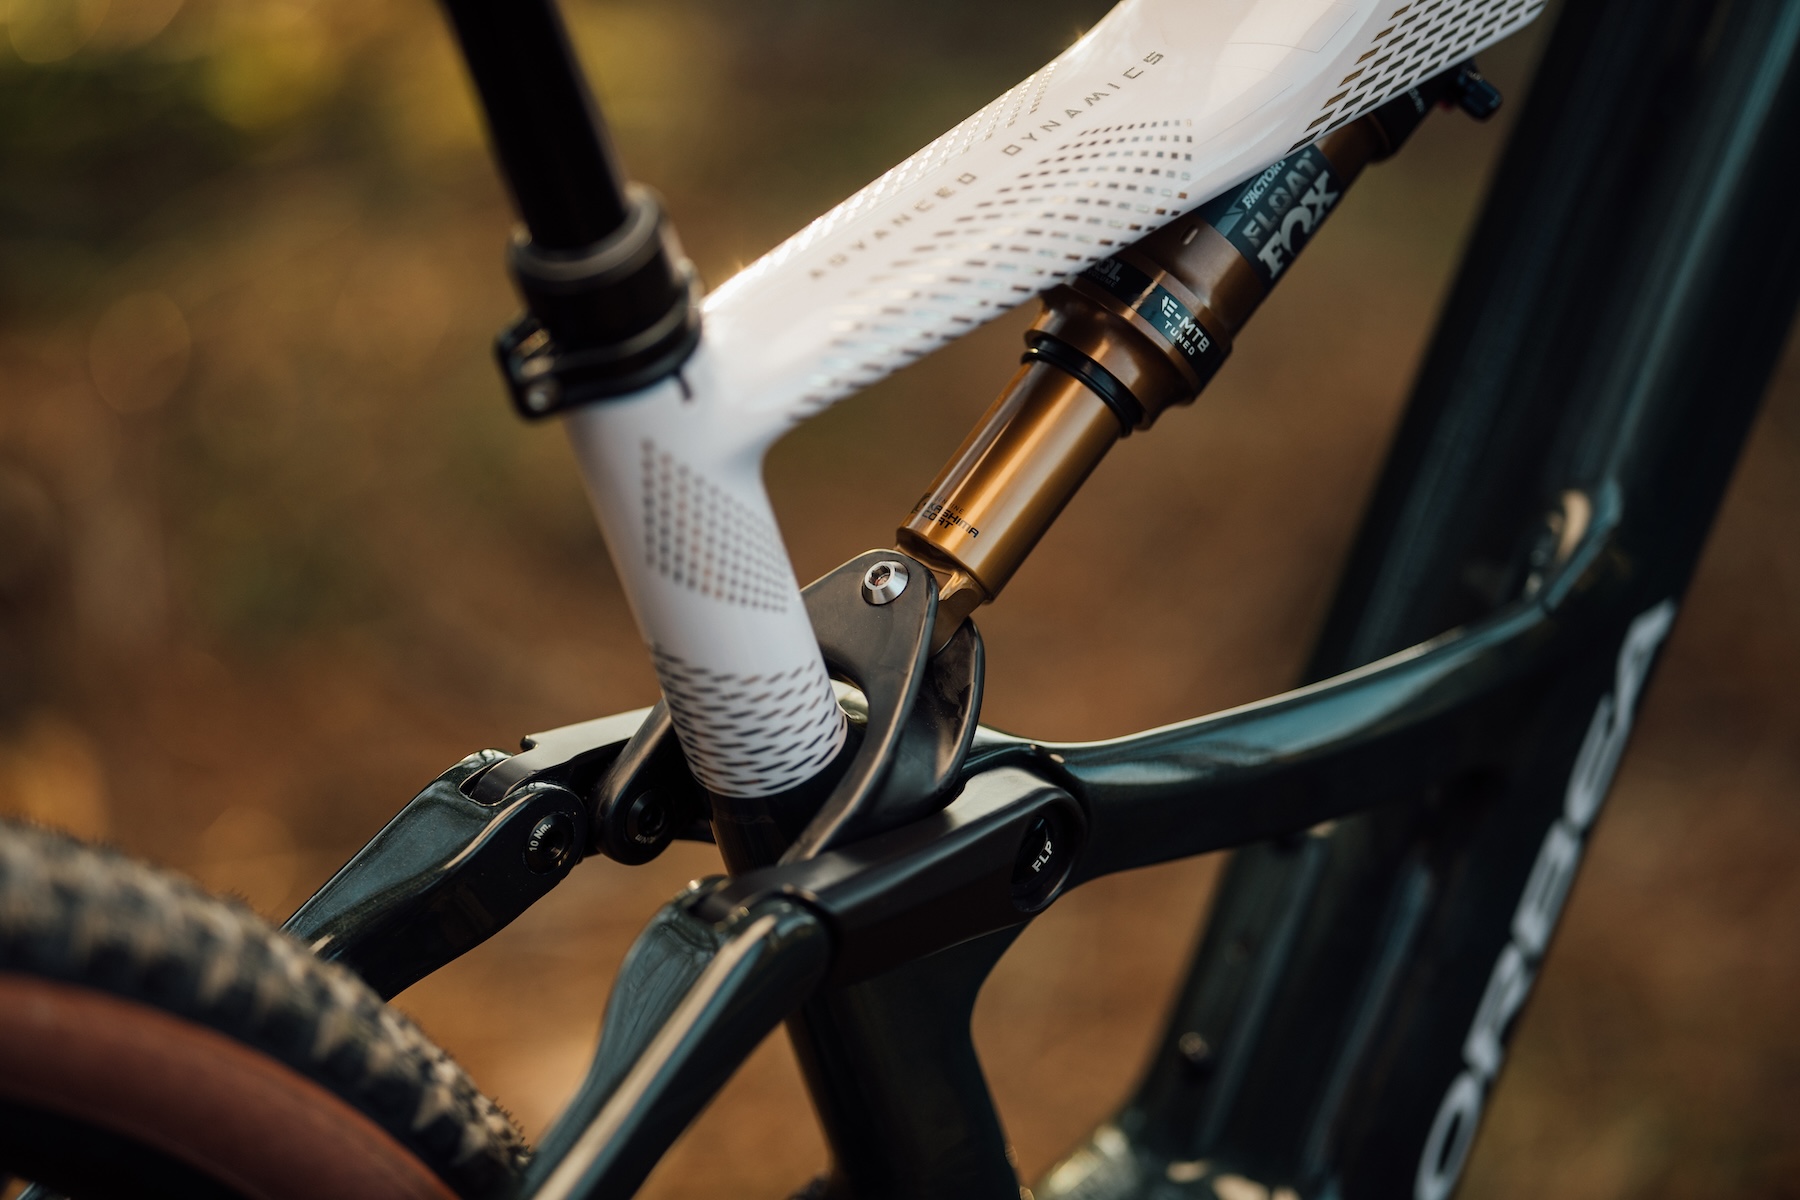 Zack Henderson reviews the Orbea Rise